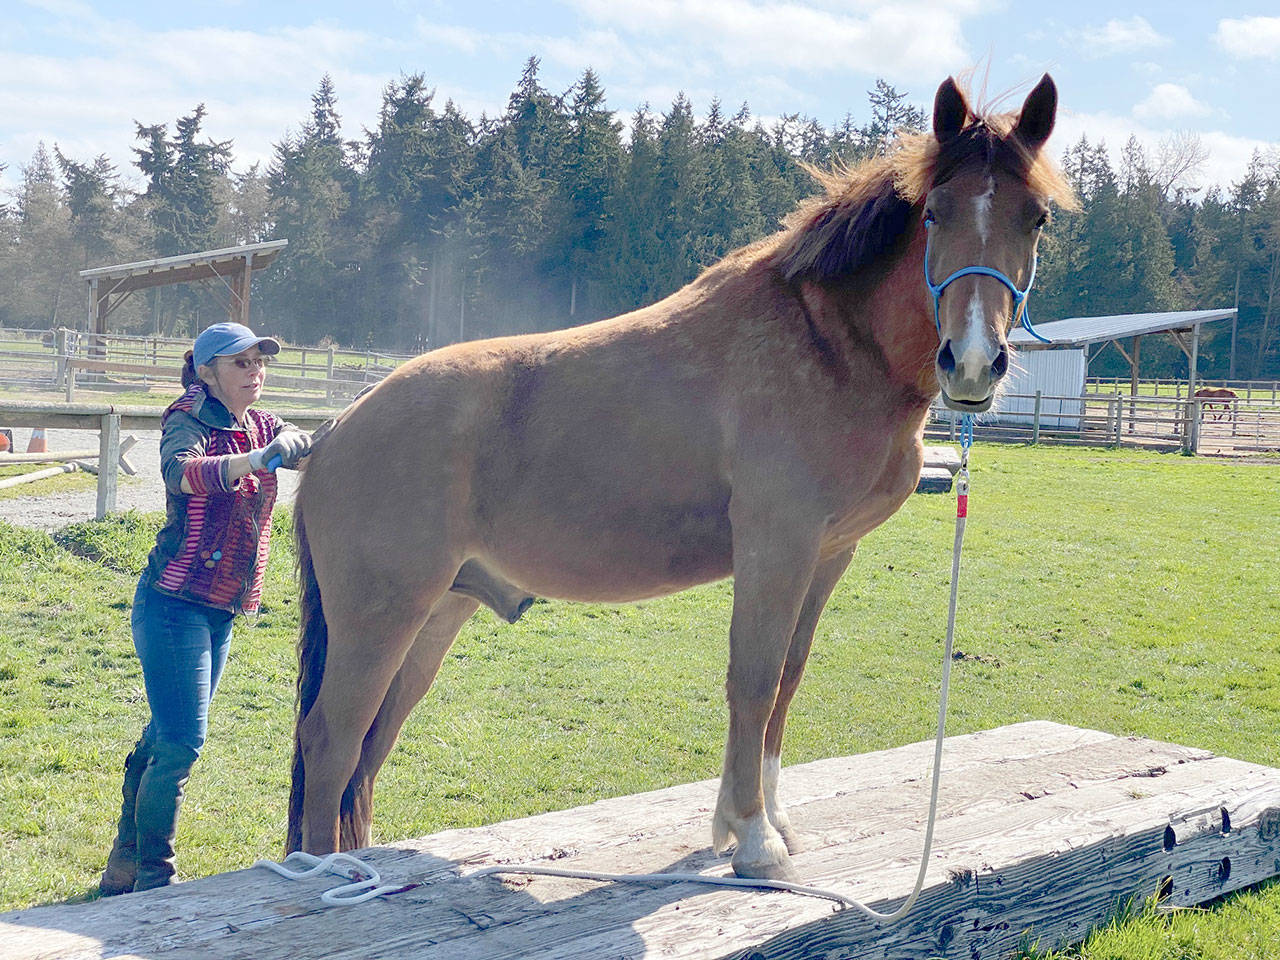 The stay-at-home orders due to the COVID-19 virus doesn’t have to feel limiting. Freedom Farm owner Mary Gallagher looks at it as an opportunity for horse owners to spend more time building up a good relationship with their horse, just as she is doing with Einstein. She’s been getting the almost 3-year-old horse out of his pen for a while every day for fun learning activities like teaching him to stretch out and place his front legs on a platform, then standing still, untied, while she grooms him – an exercise that’s good for both their spirits. Photo by Mary Tulin